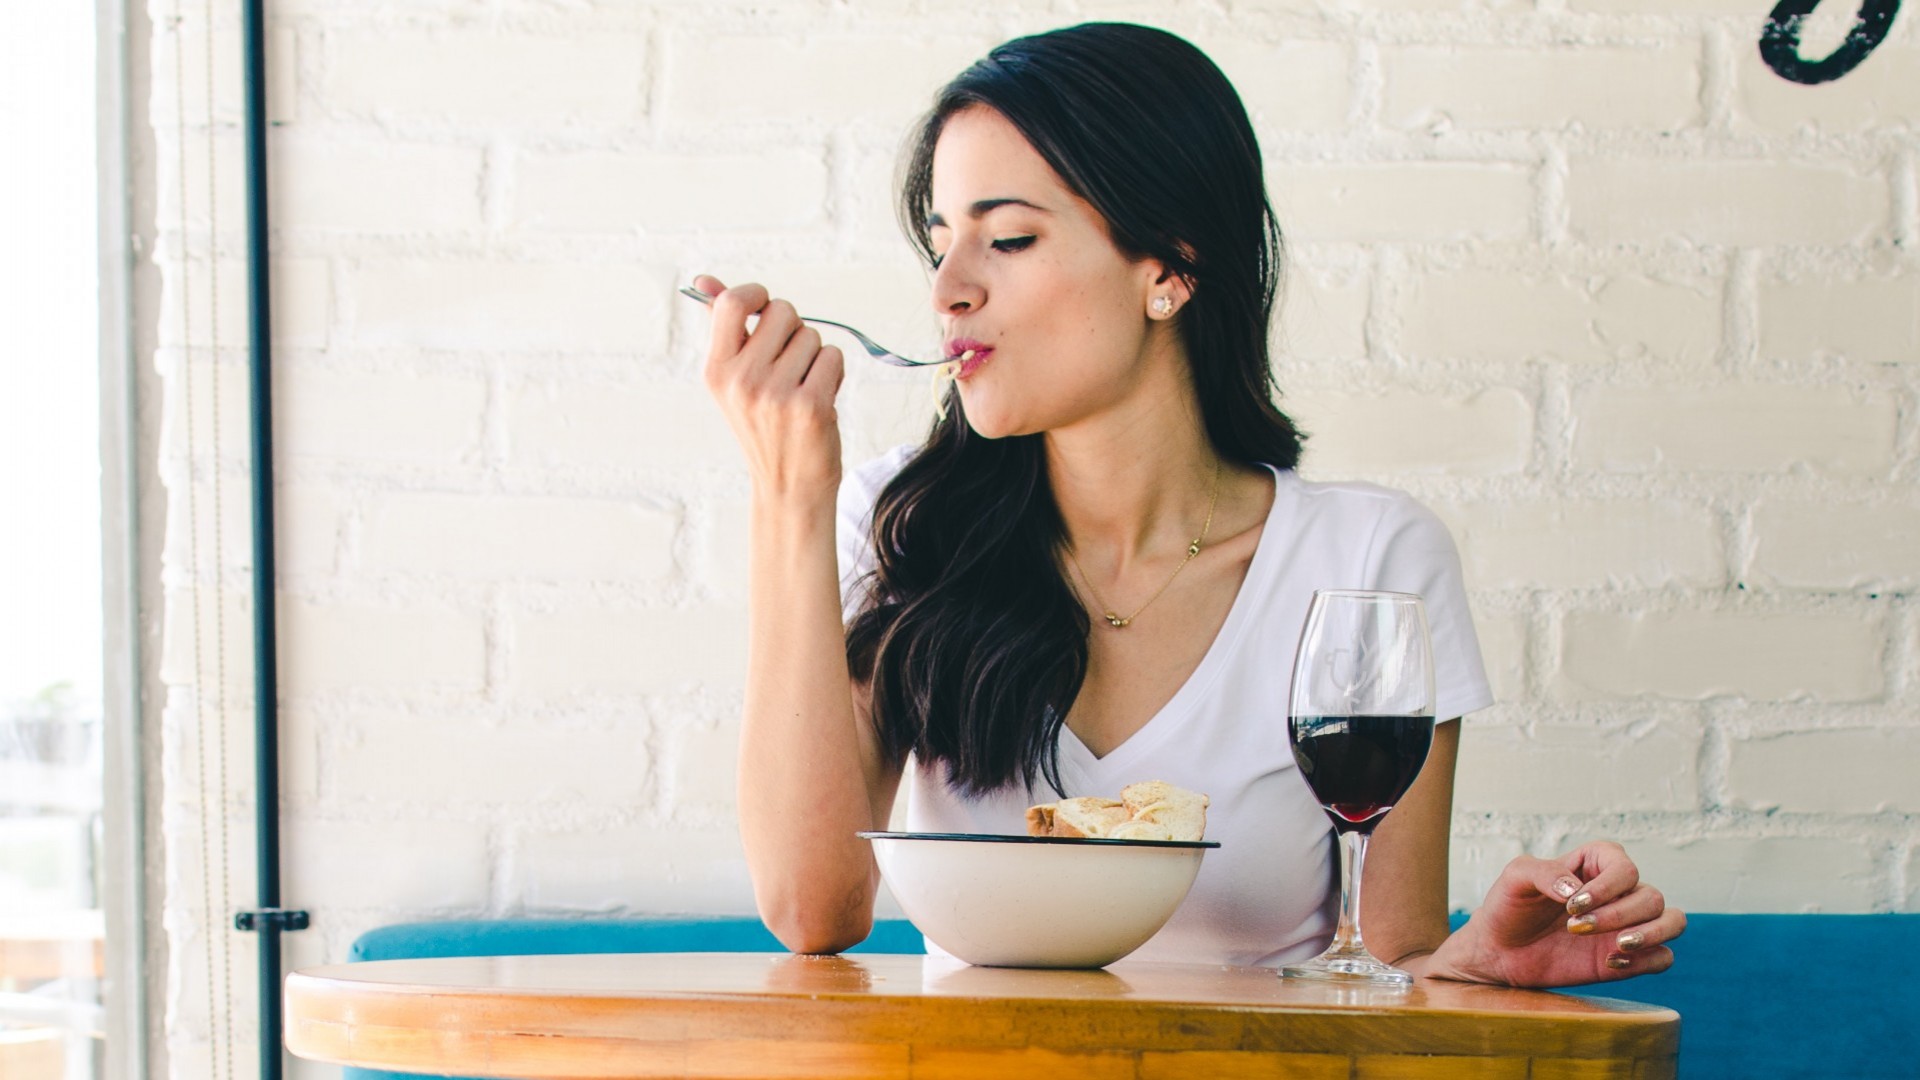 Woman eating a pasta with relish and drinking a glass of red wine